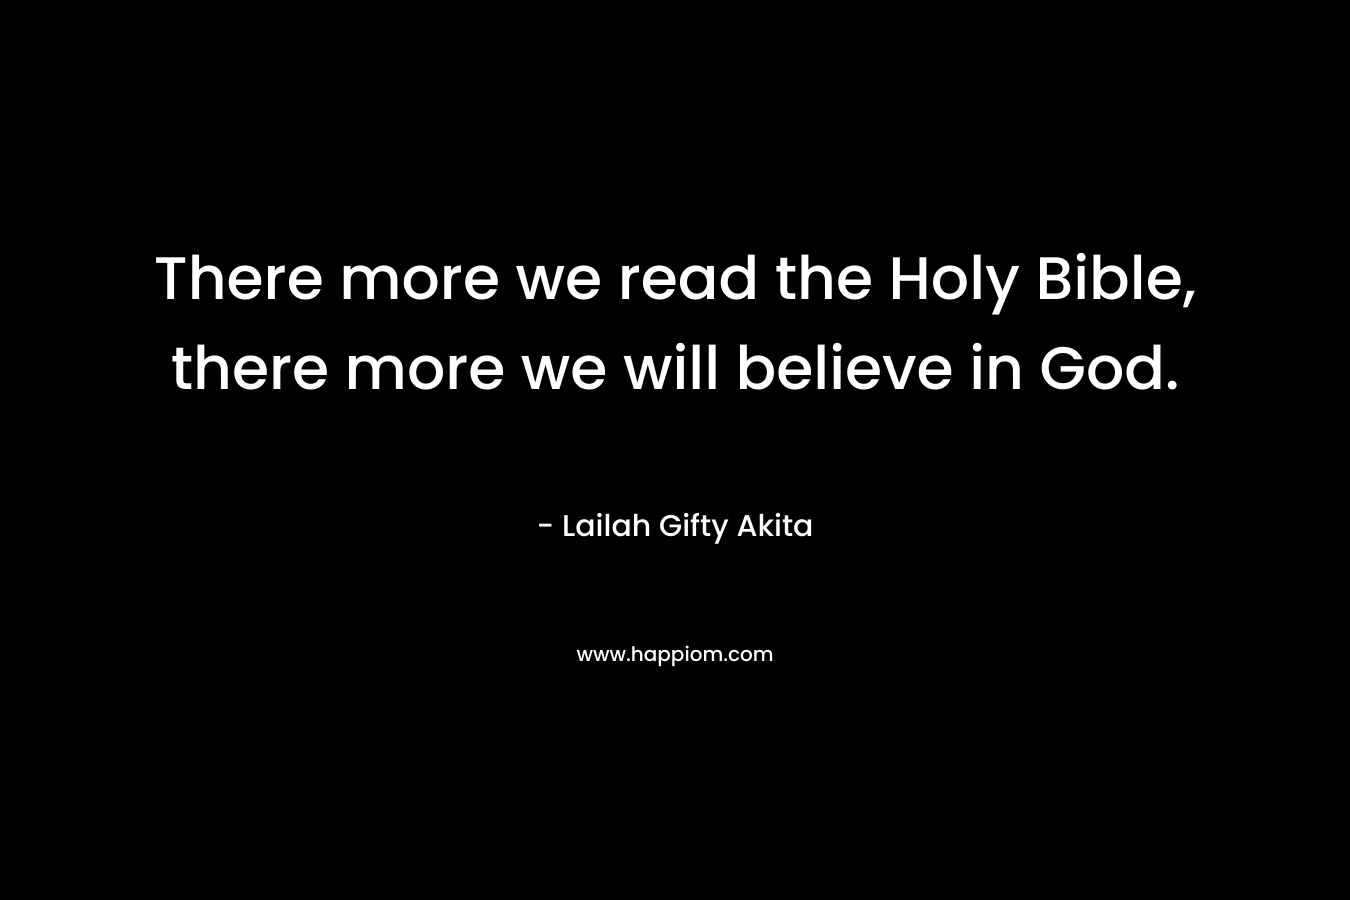 There more we read the Holy Bible, there more we will believe in God.